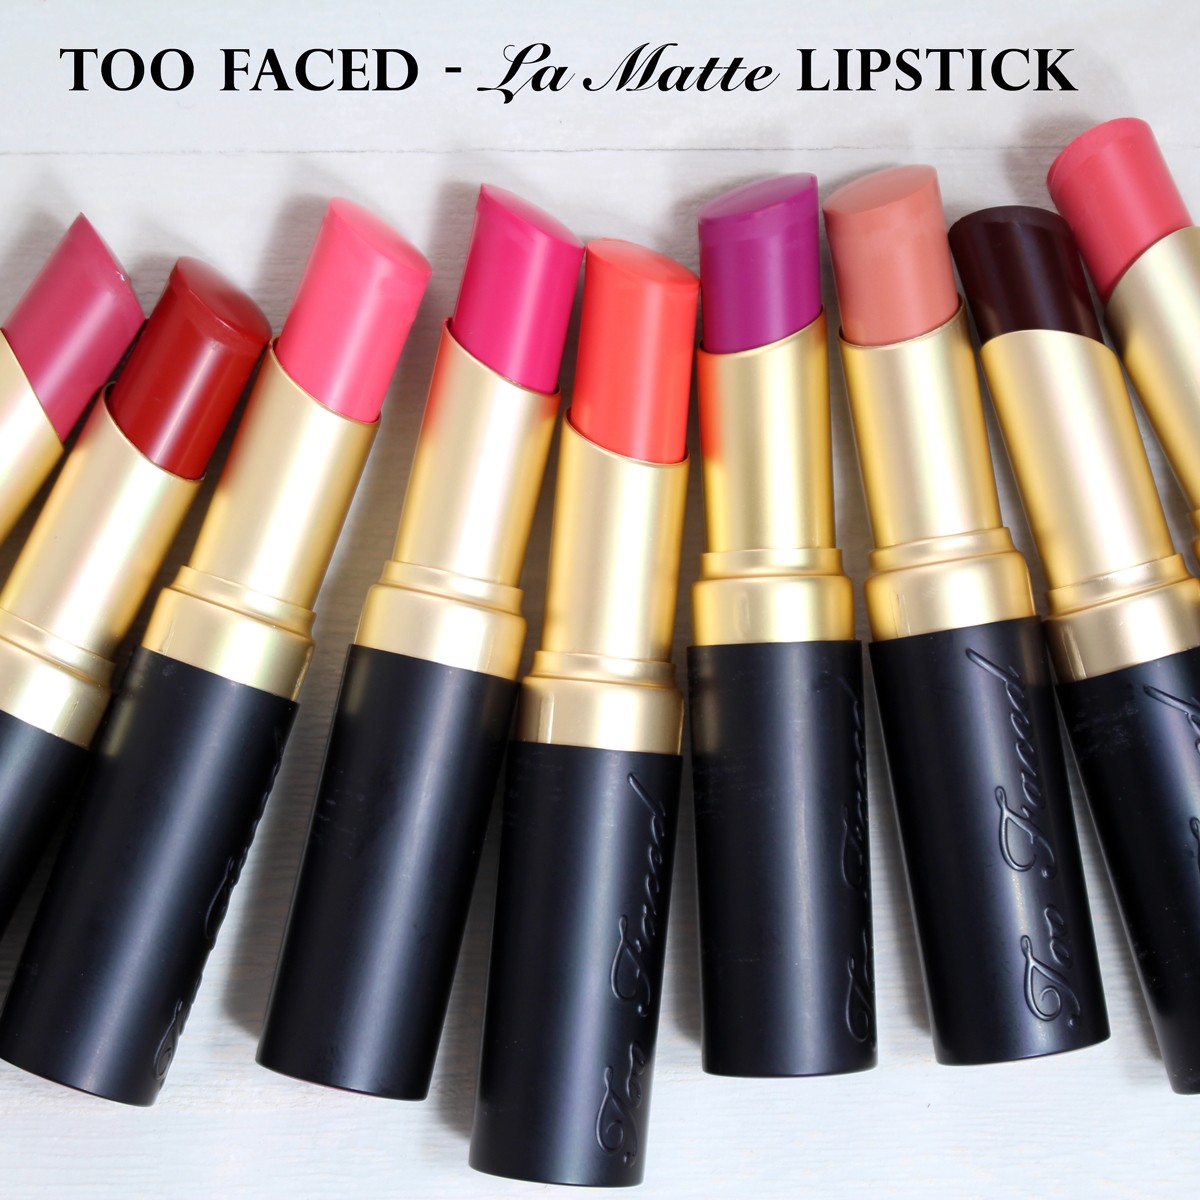 Too Faced La Matte Lipstick Collection | My Beauty Bunny - Cruelty Free ...